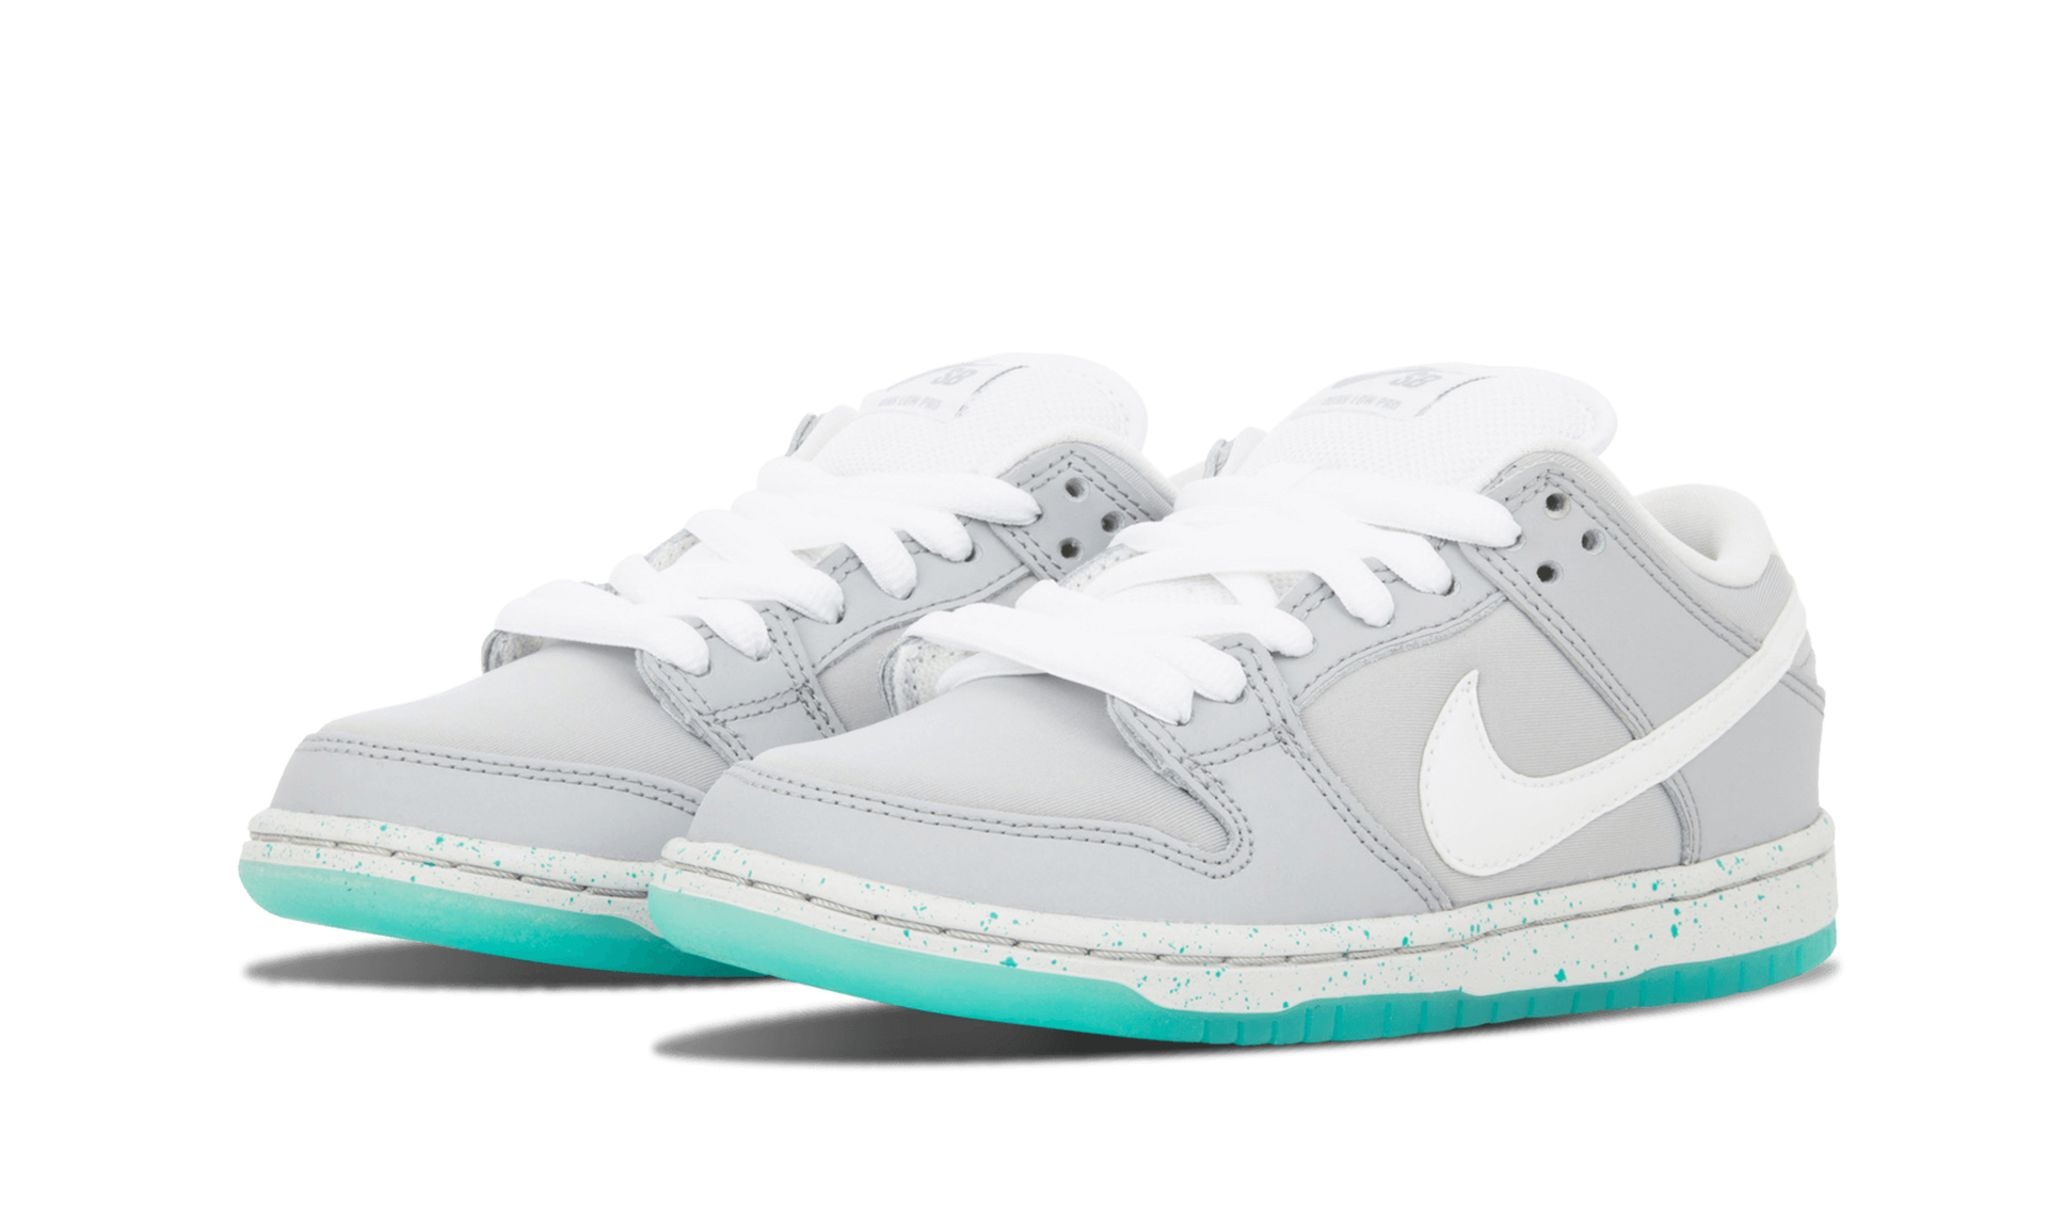 SB Dunk Low Premium "Marty McFly" - 2